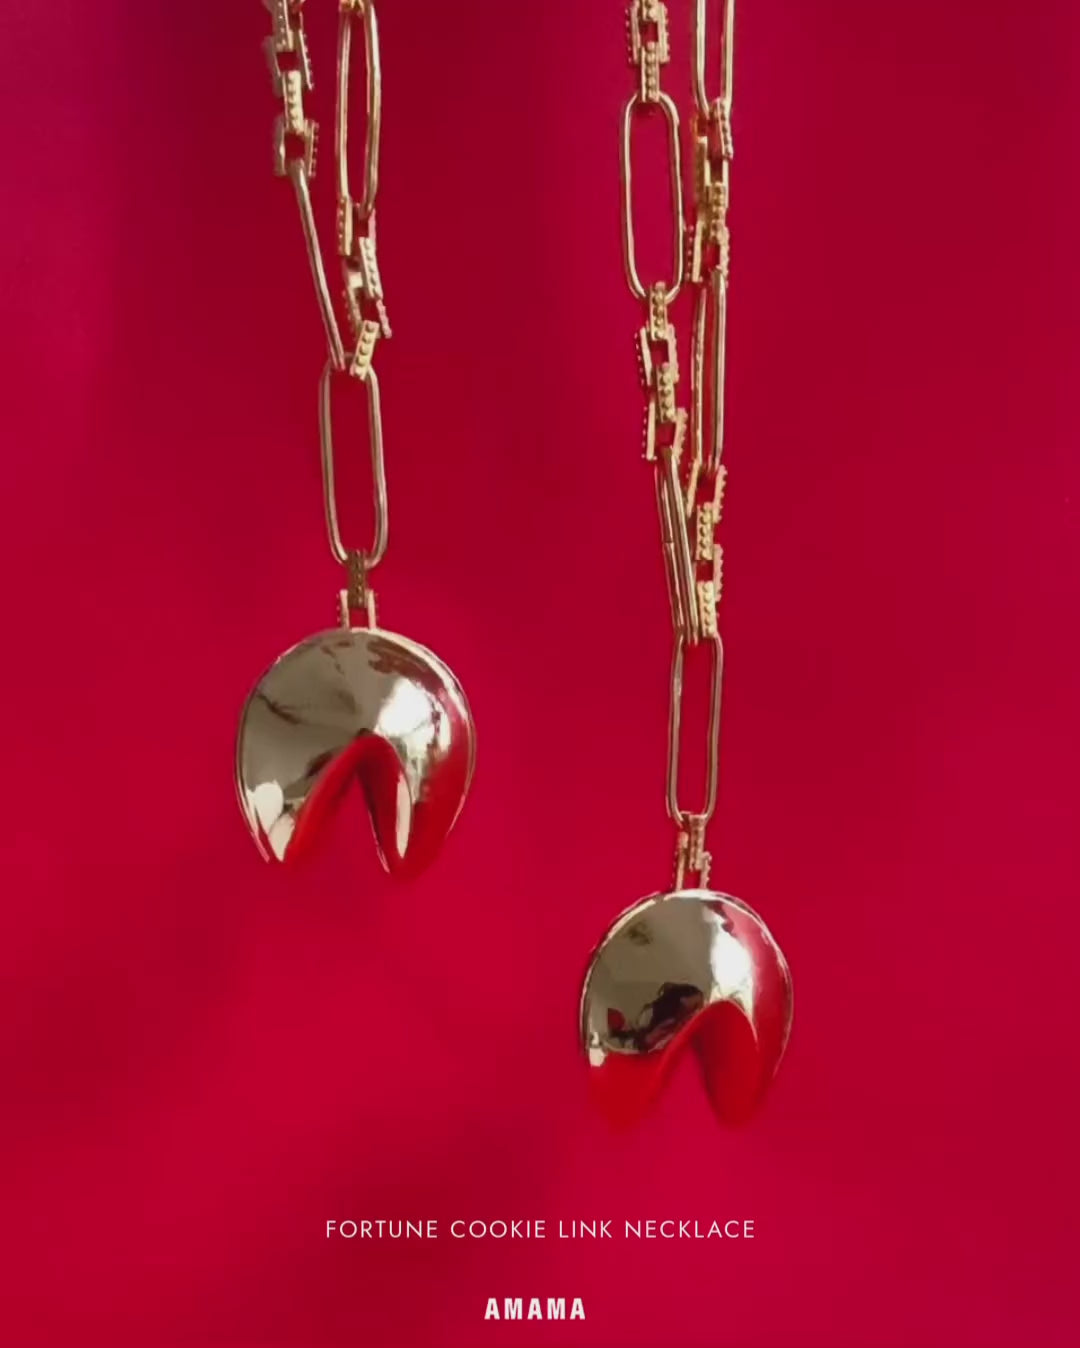 Amama,Fortune Cookie Link Necklace